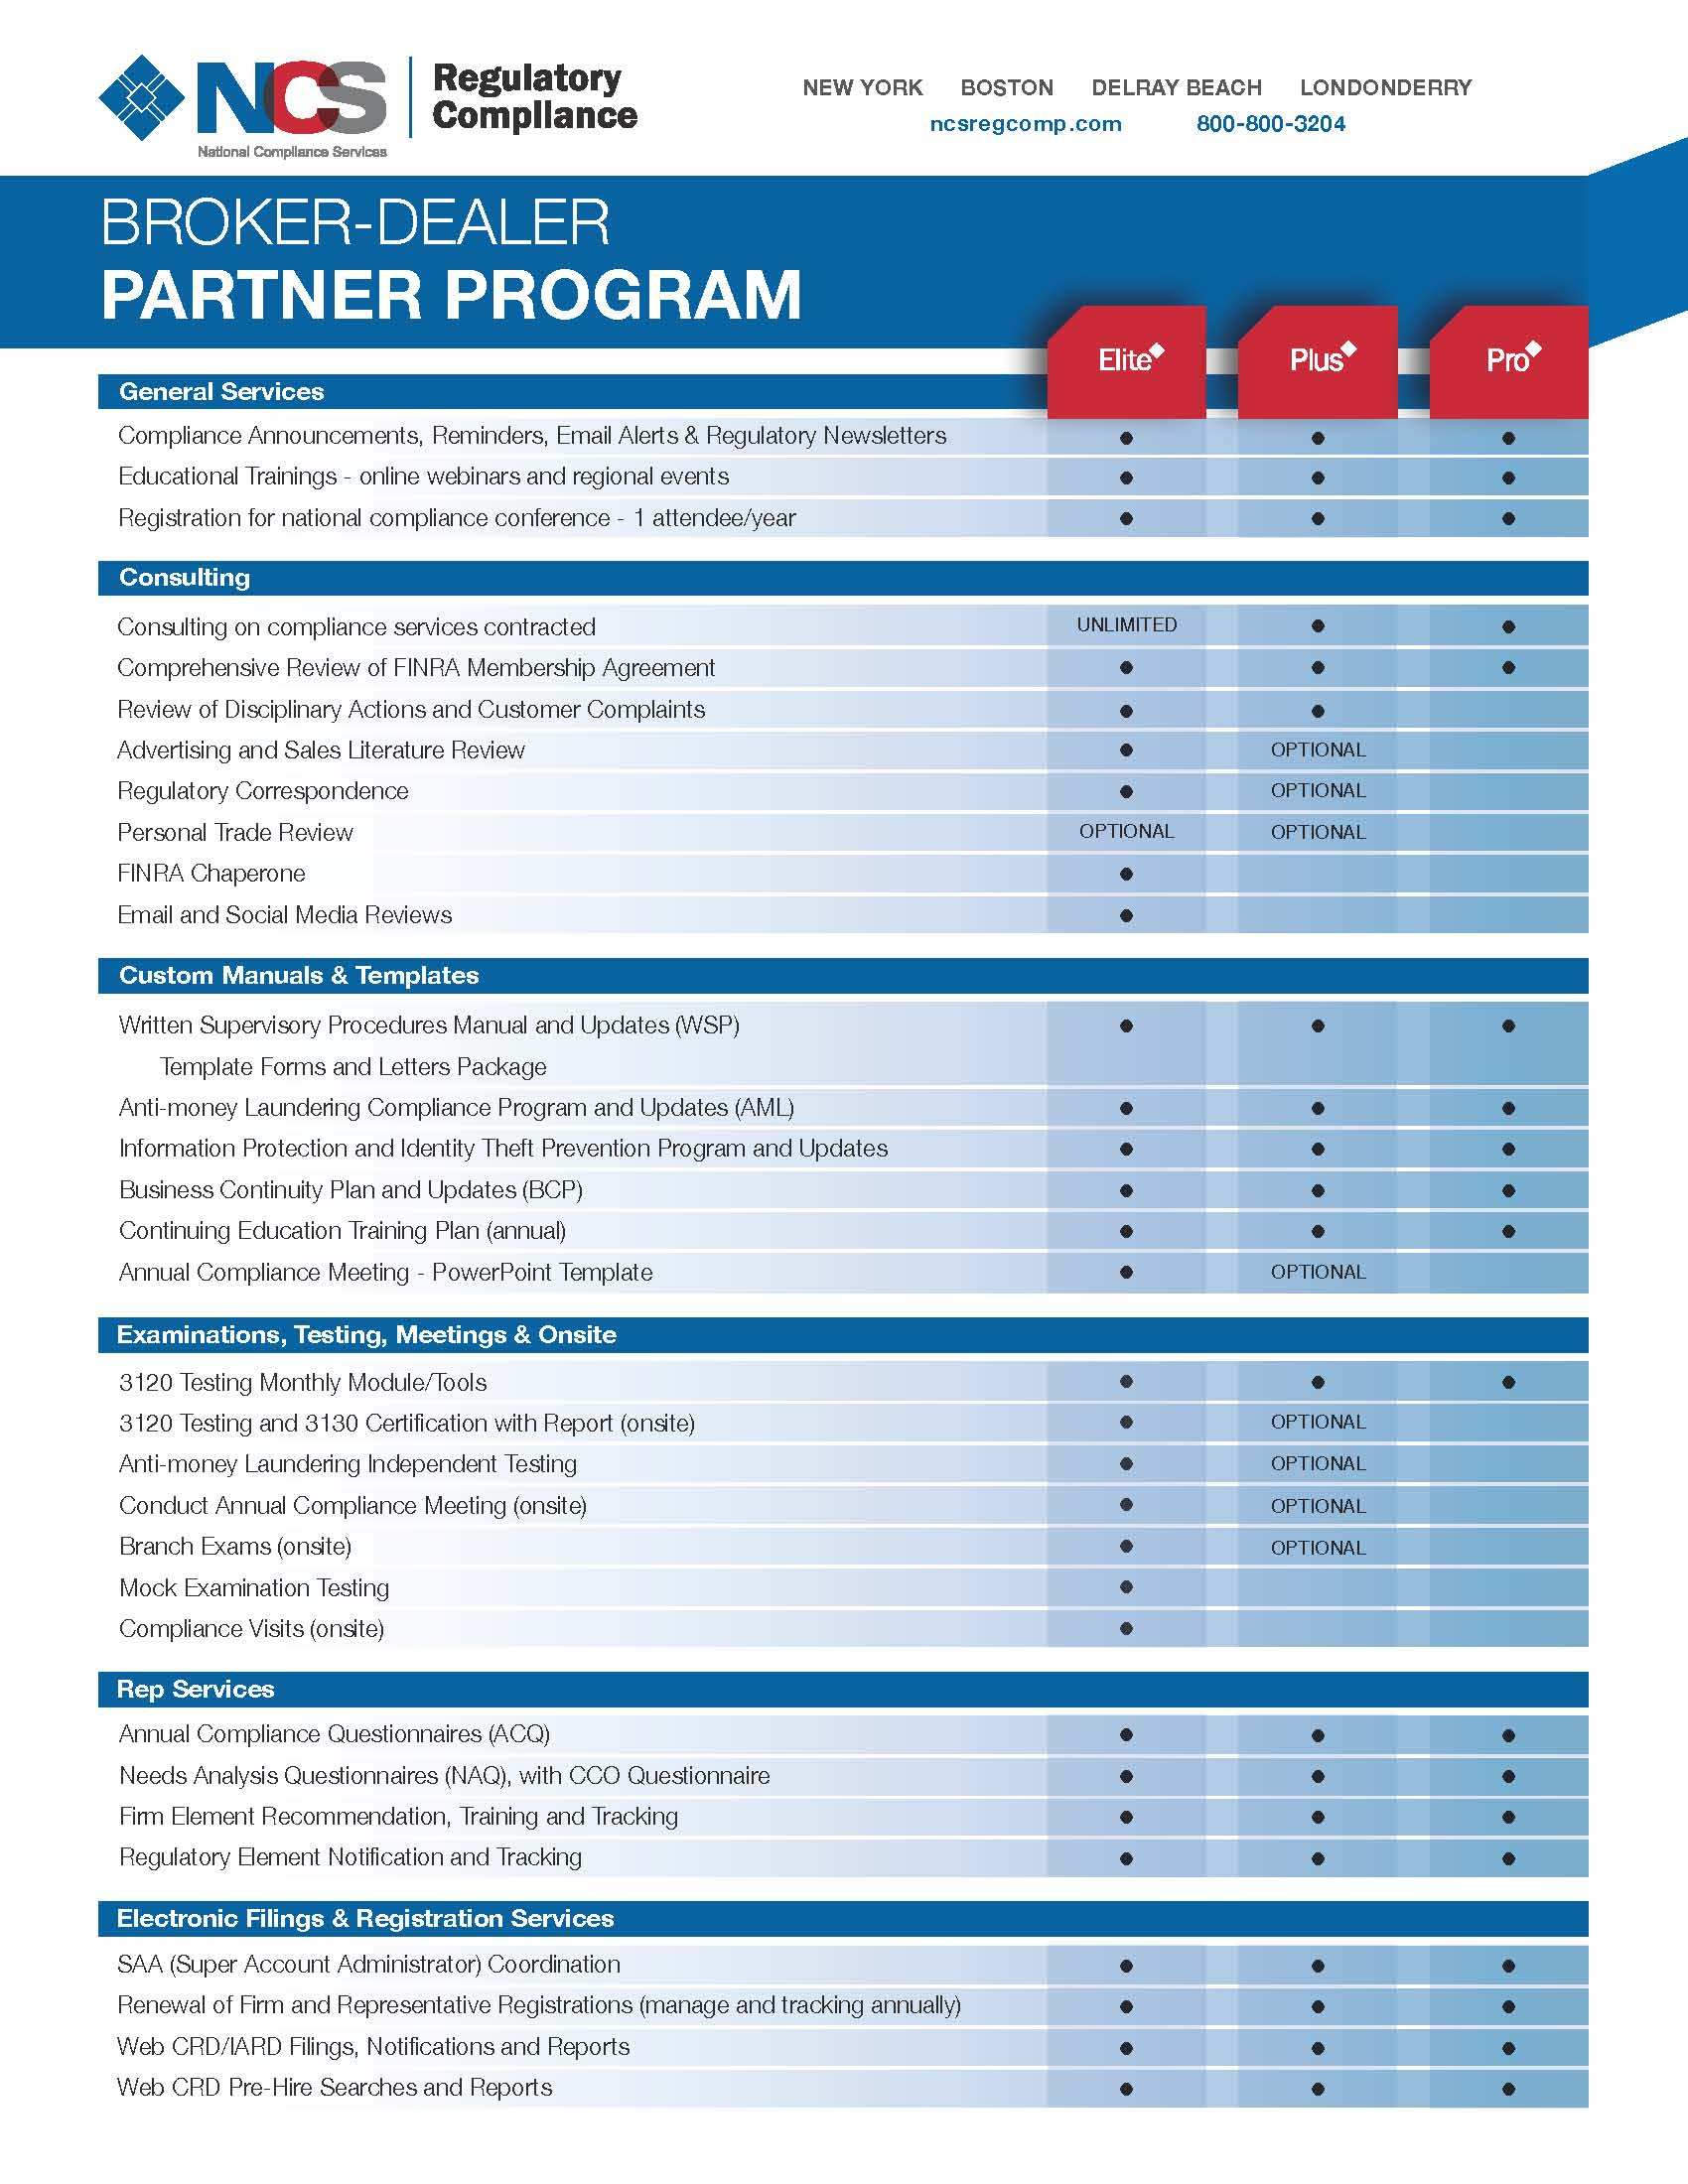 Finra Membership Agreement Broker Dealer Customized Bd Programs To Fit Your Compliance Needs